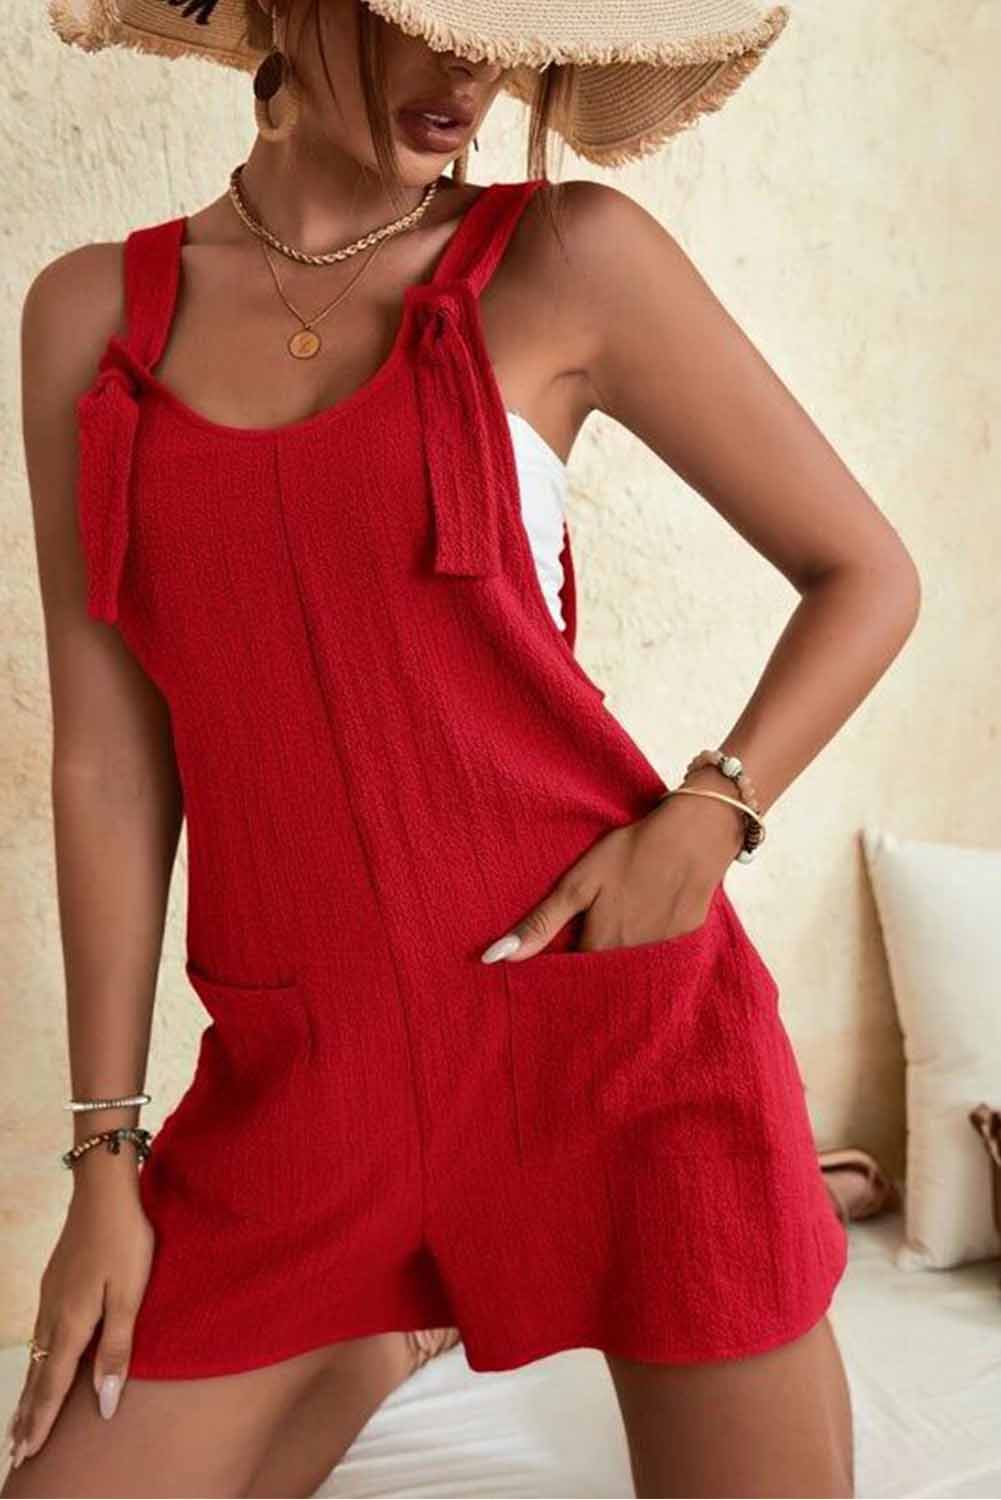 LC6412245-3-S, LC6412245-3-M, LC6412245-3-L, LC6412245-3-XL, LC6412245-3-2XL, Adjustable Straps Pocketed Textured Romper